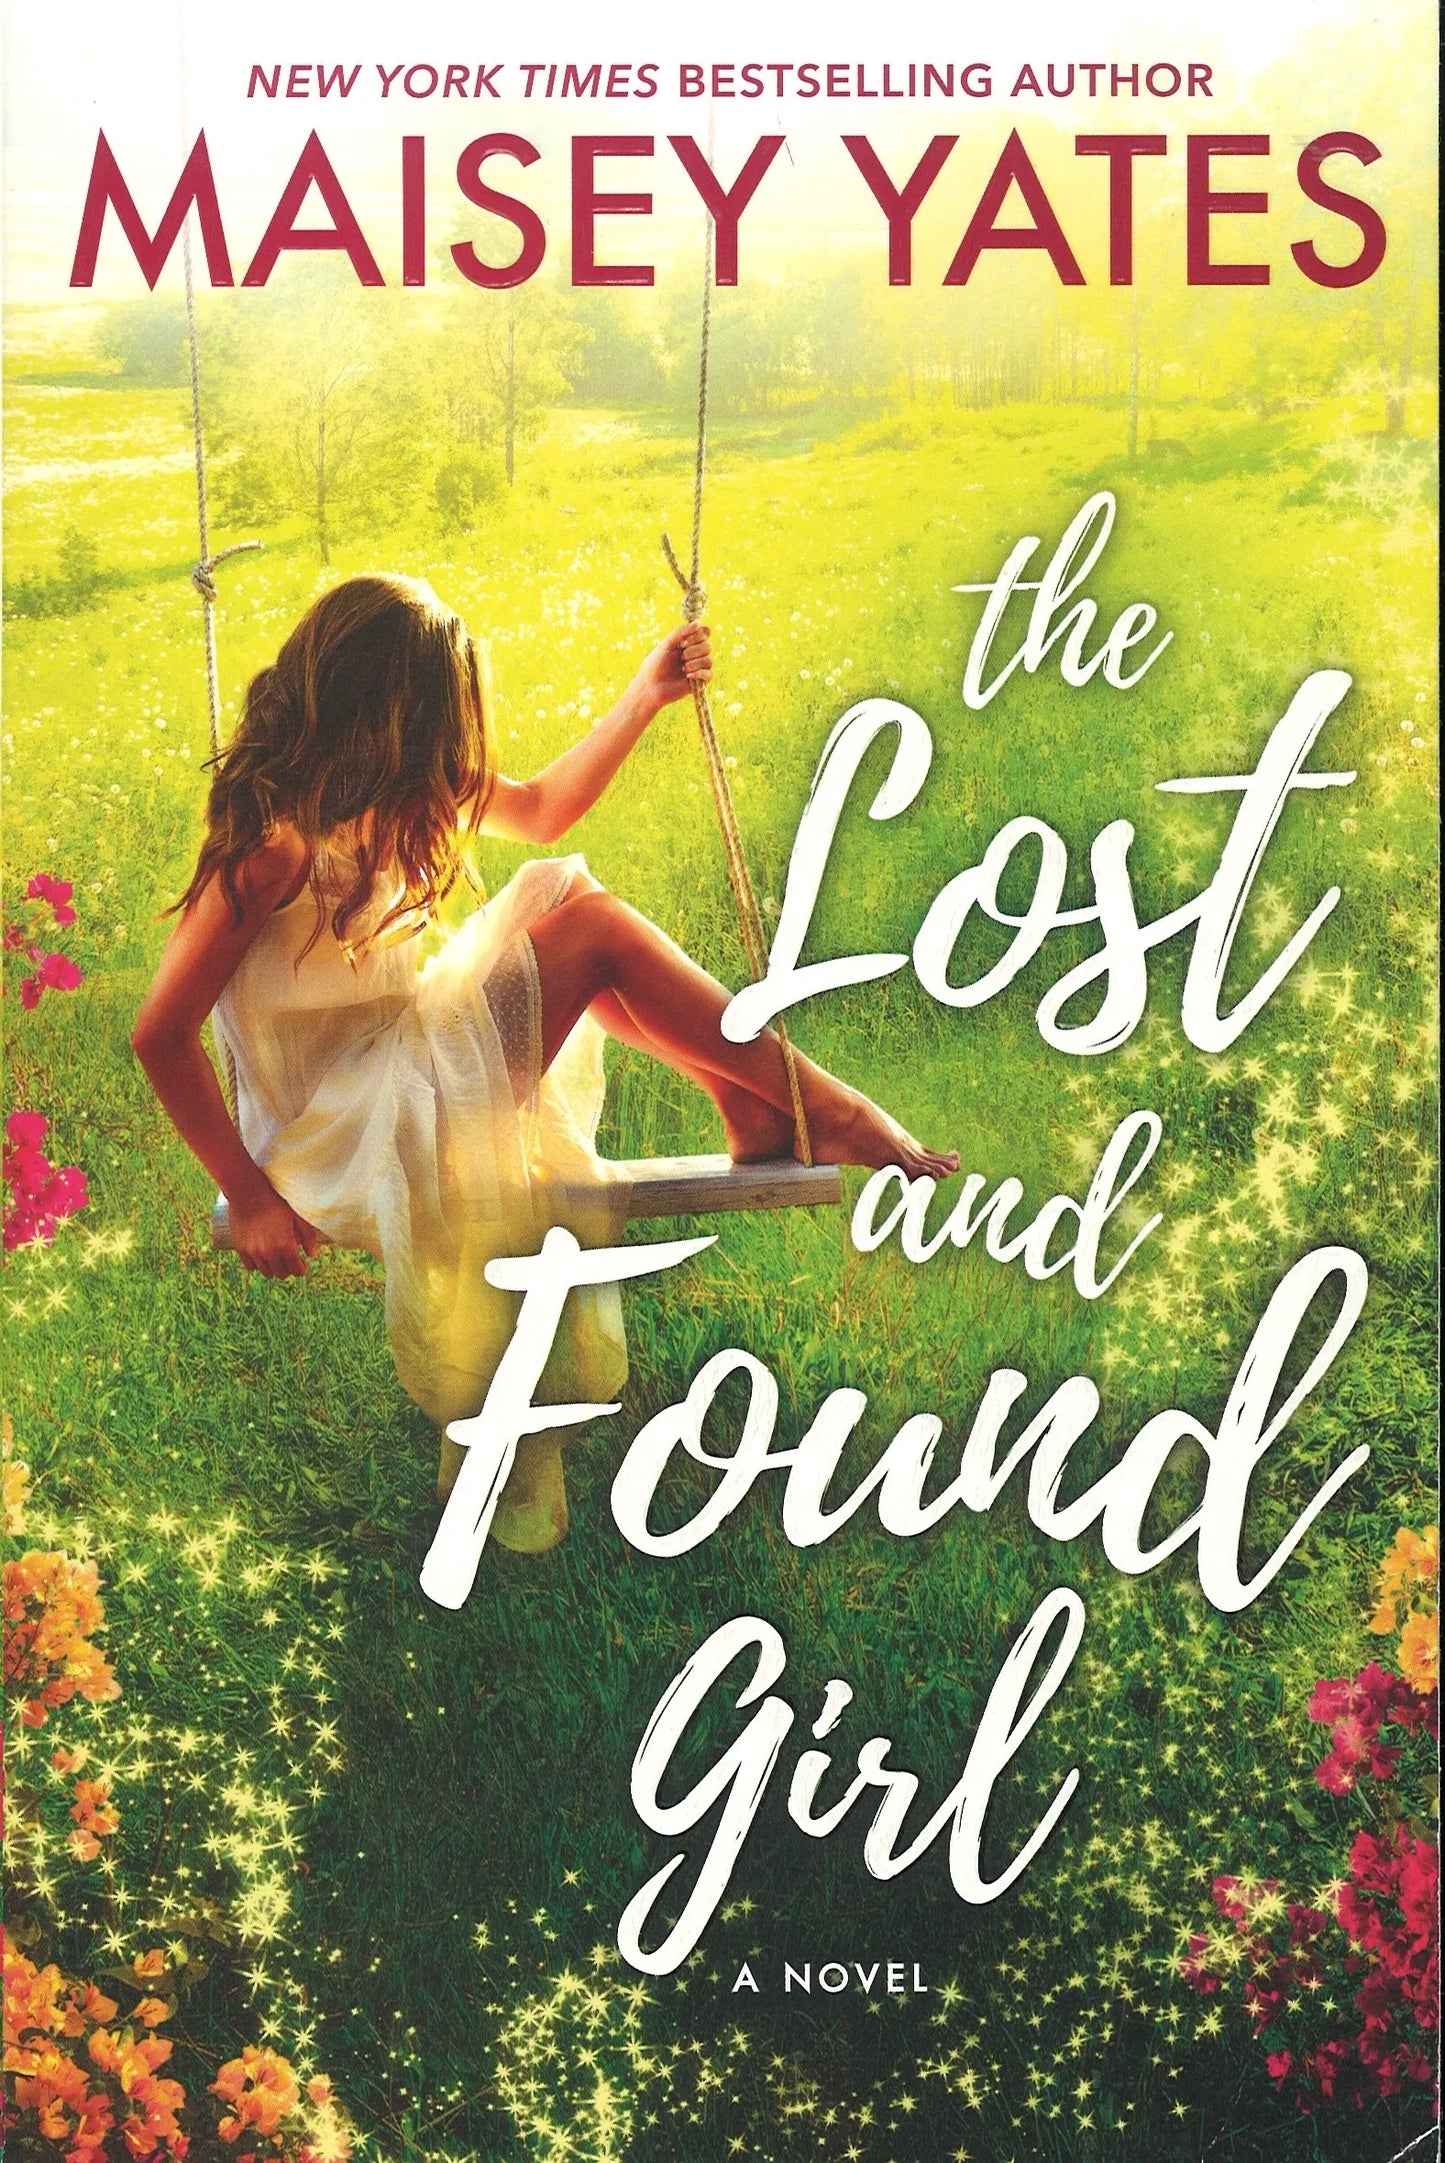 The Lost And Found Girl, Maisey Yates